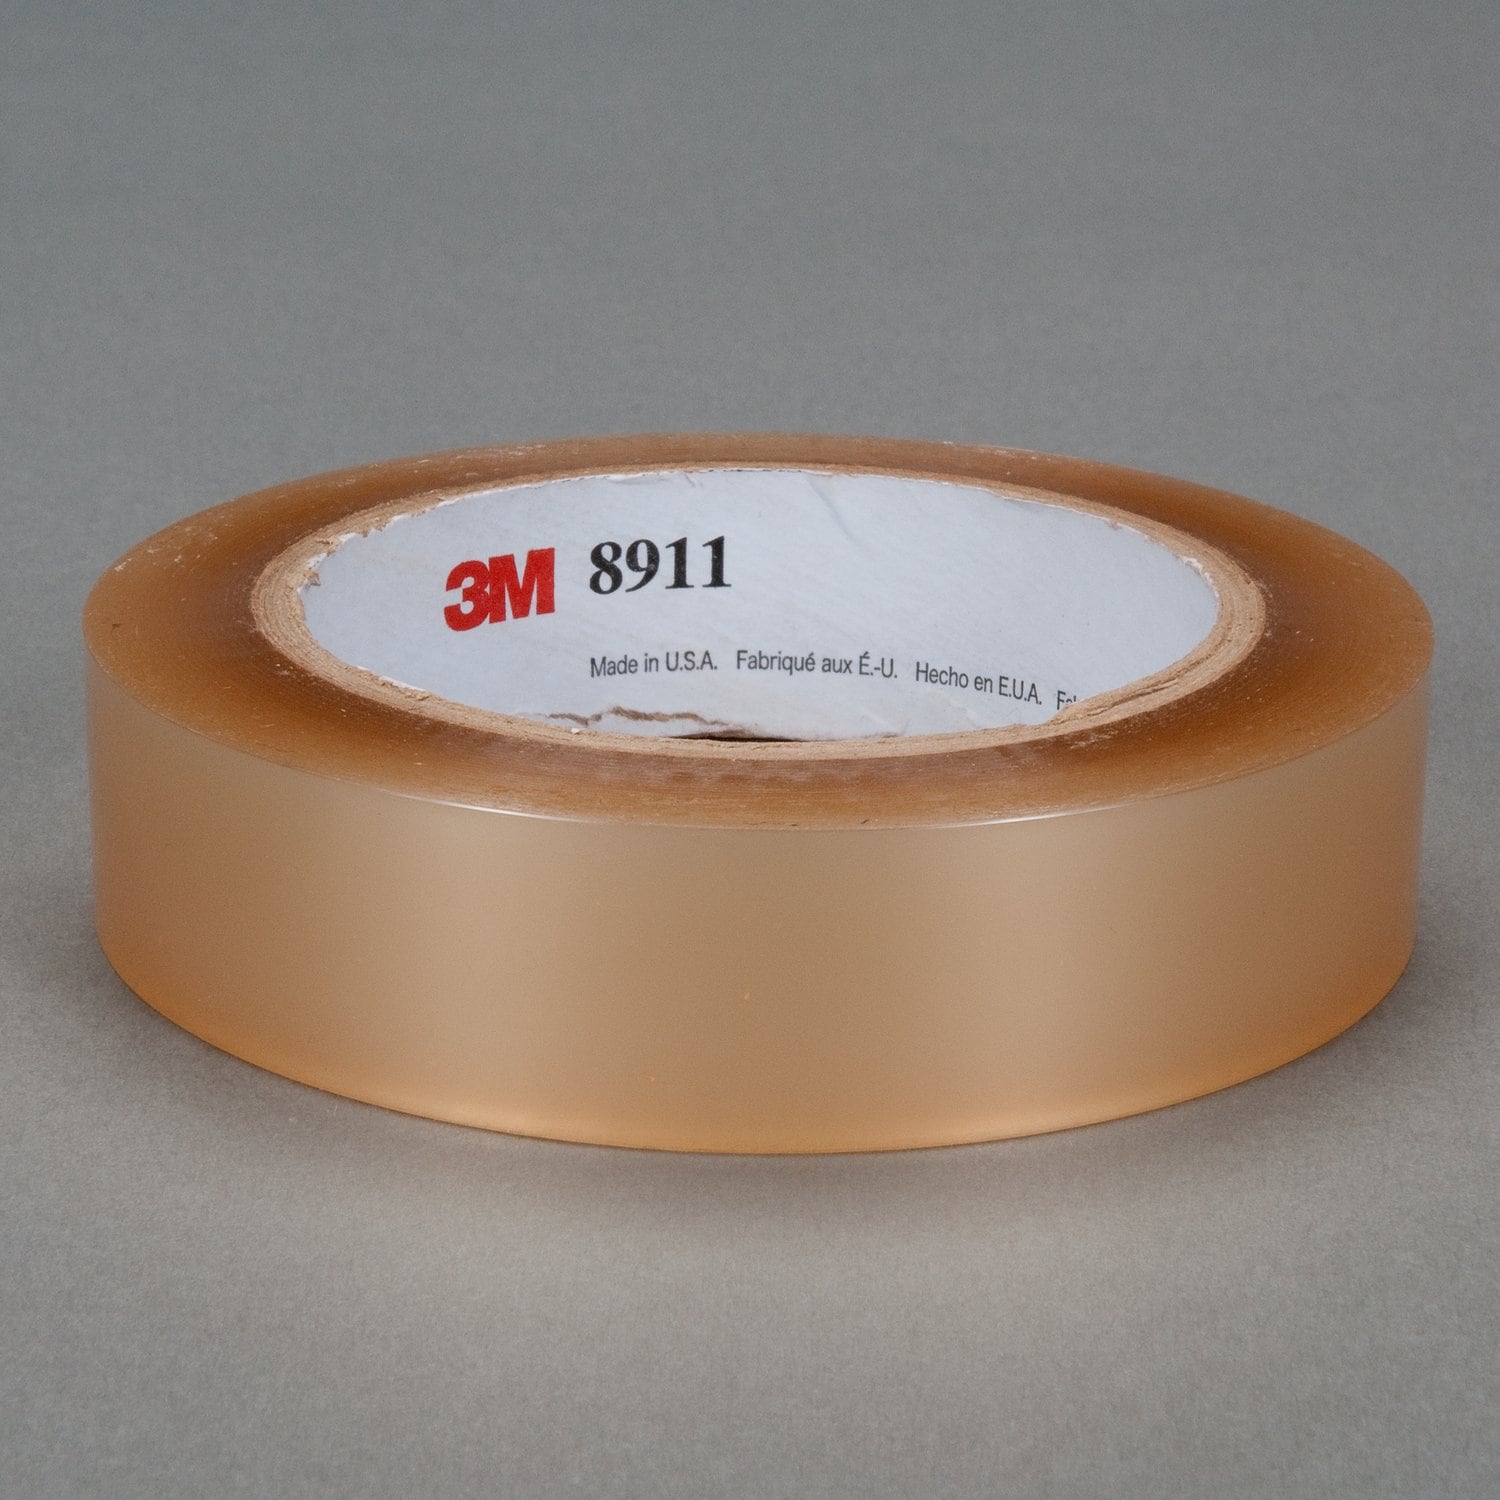 00051111927571, 3M Polyester Tape 8911, Transparent, 1 in x 72 yd, 2.3  mil, 36 rolls per case, Aircraft products, polyester-tapes